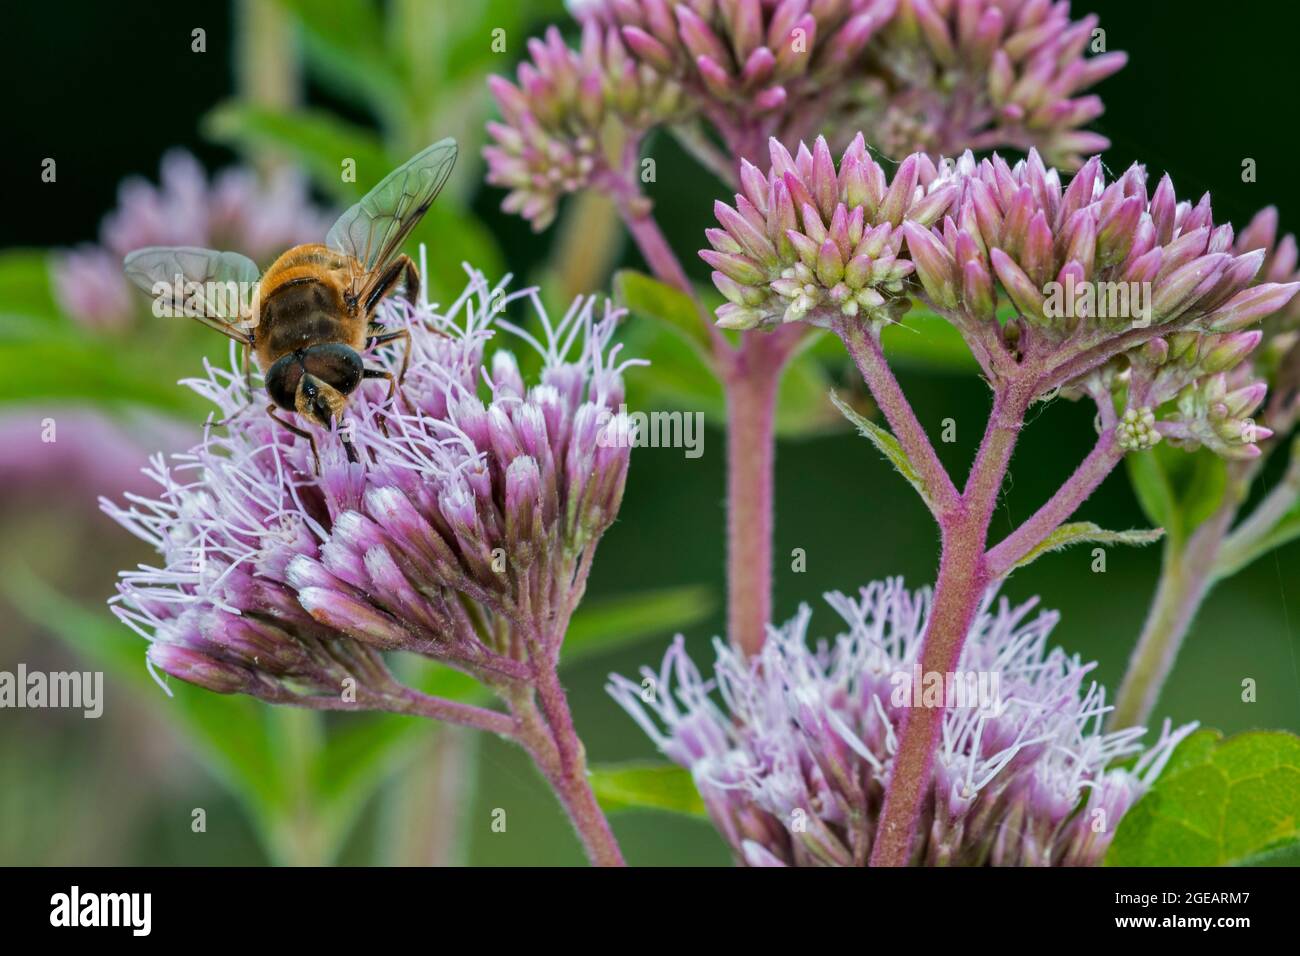 Common drone fly (Eristalis tenax) migratory hoverfly pollinating and feeding on nectar from hemp-agrimony (Eupatorium cannabinum) flower in summer Stock Photo